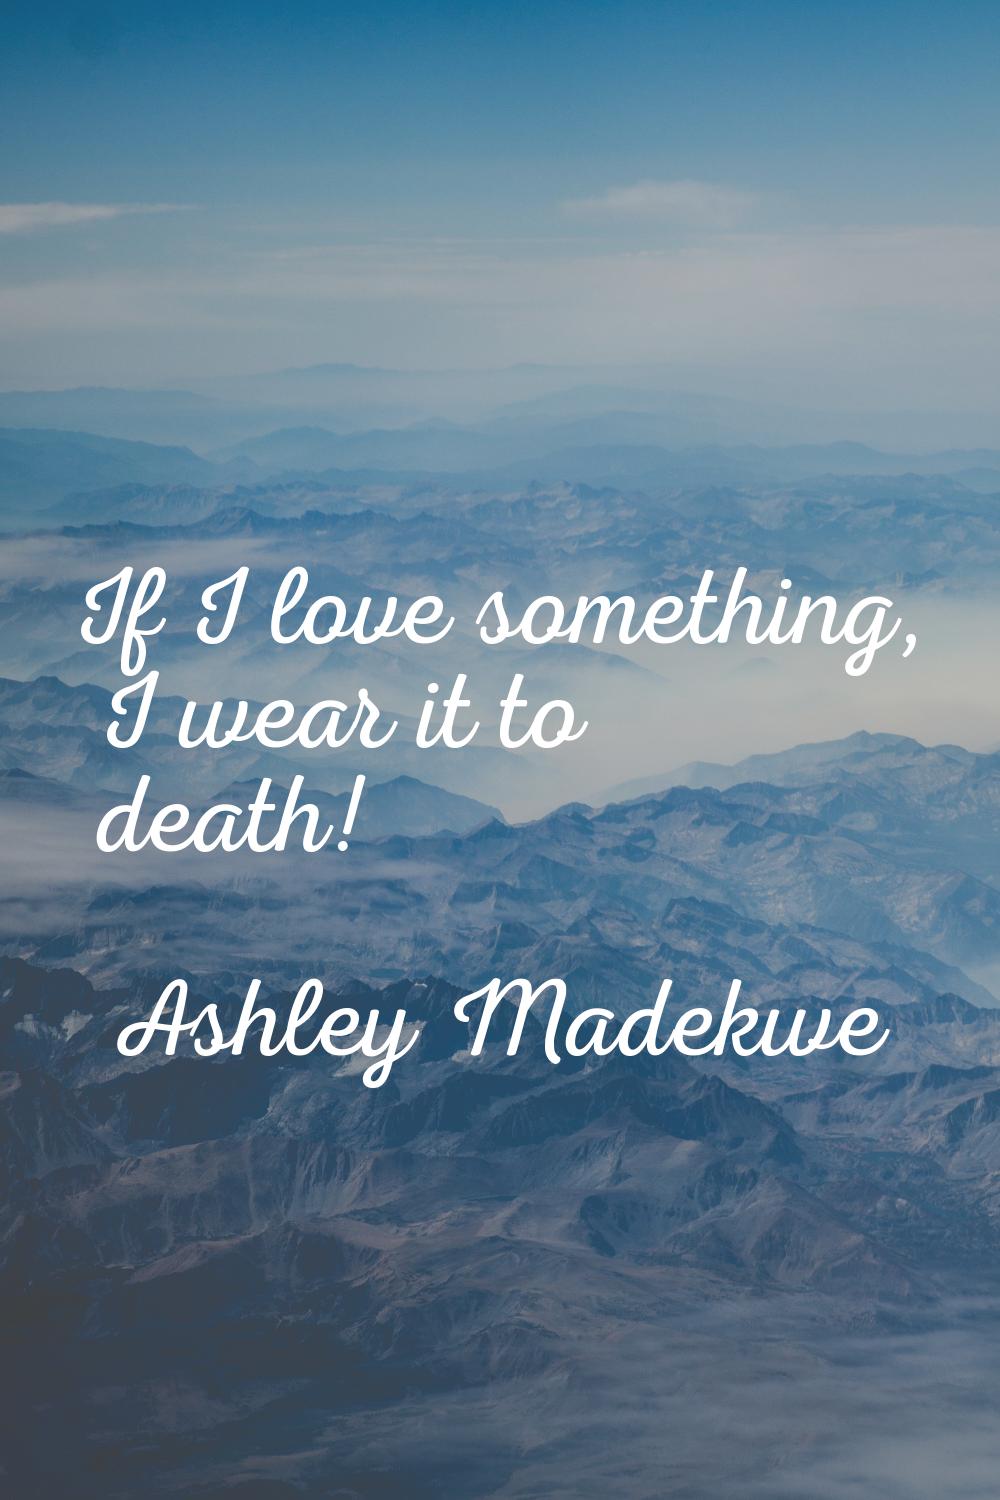 If I love something, I wear it to death!